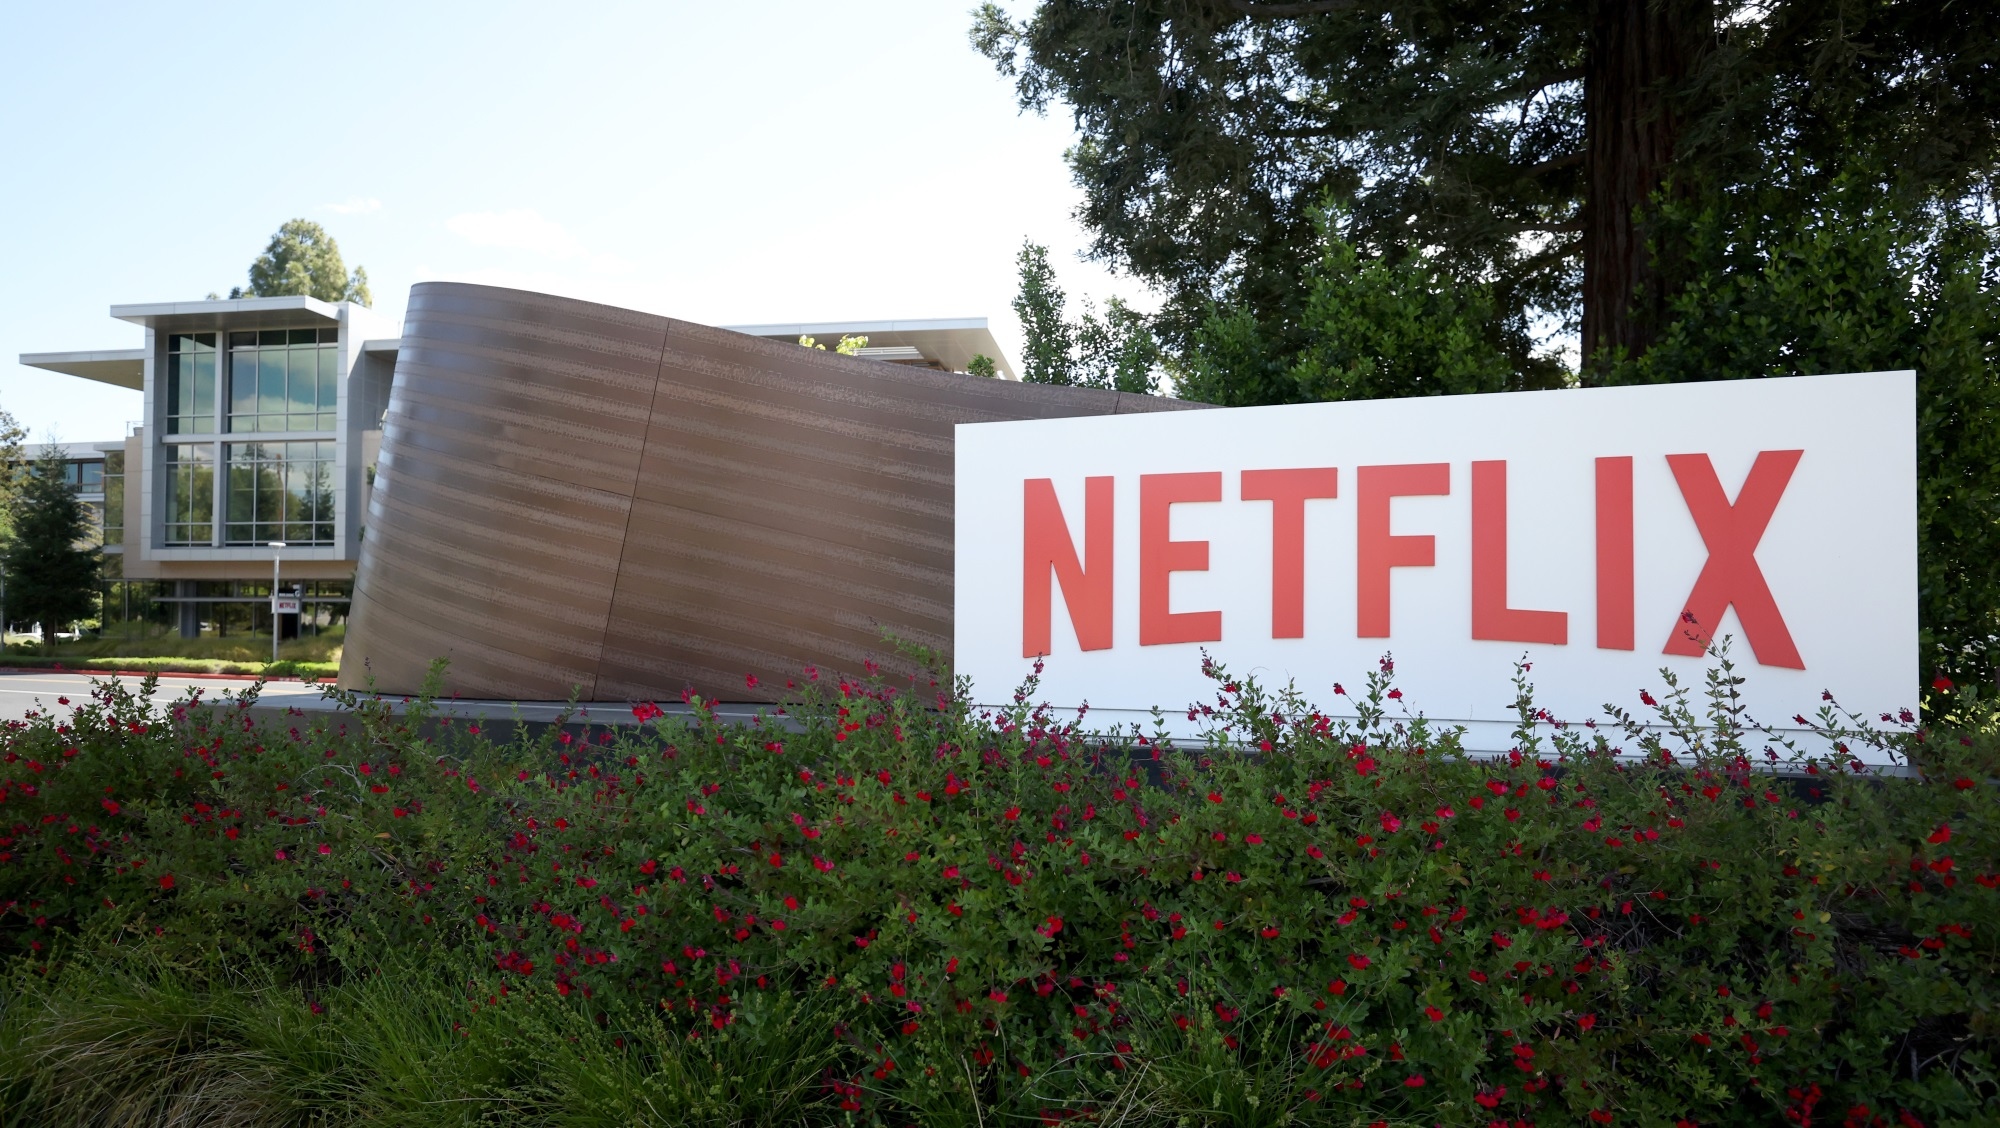 Netflix reported an increase of 2.4 million new subscribers in the third quarter of 2022